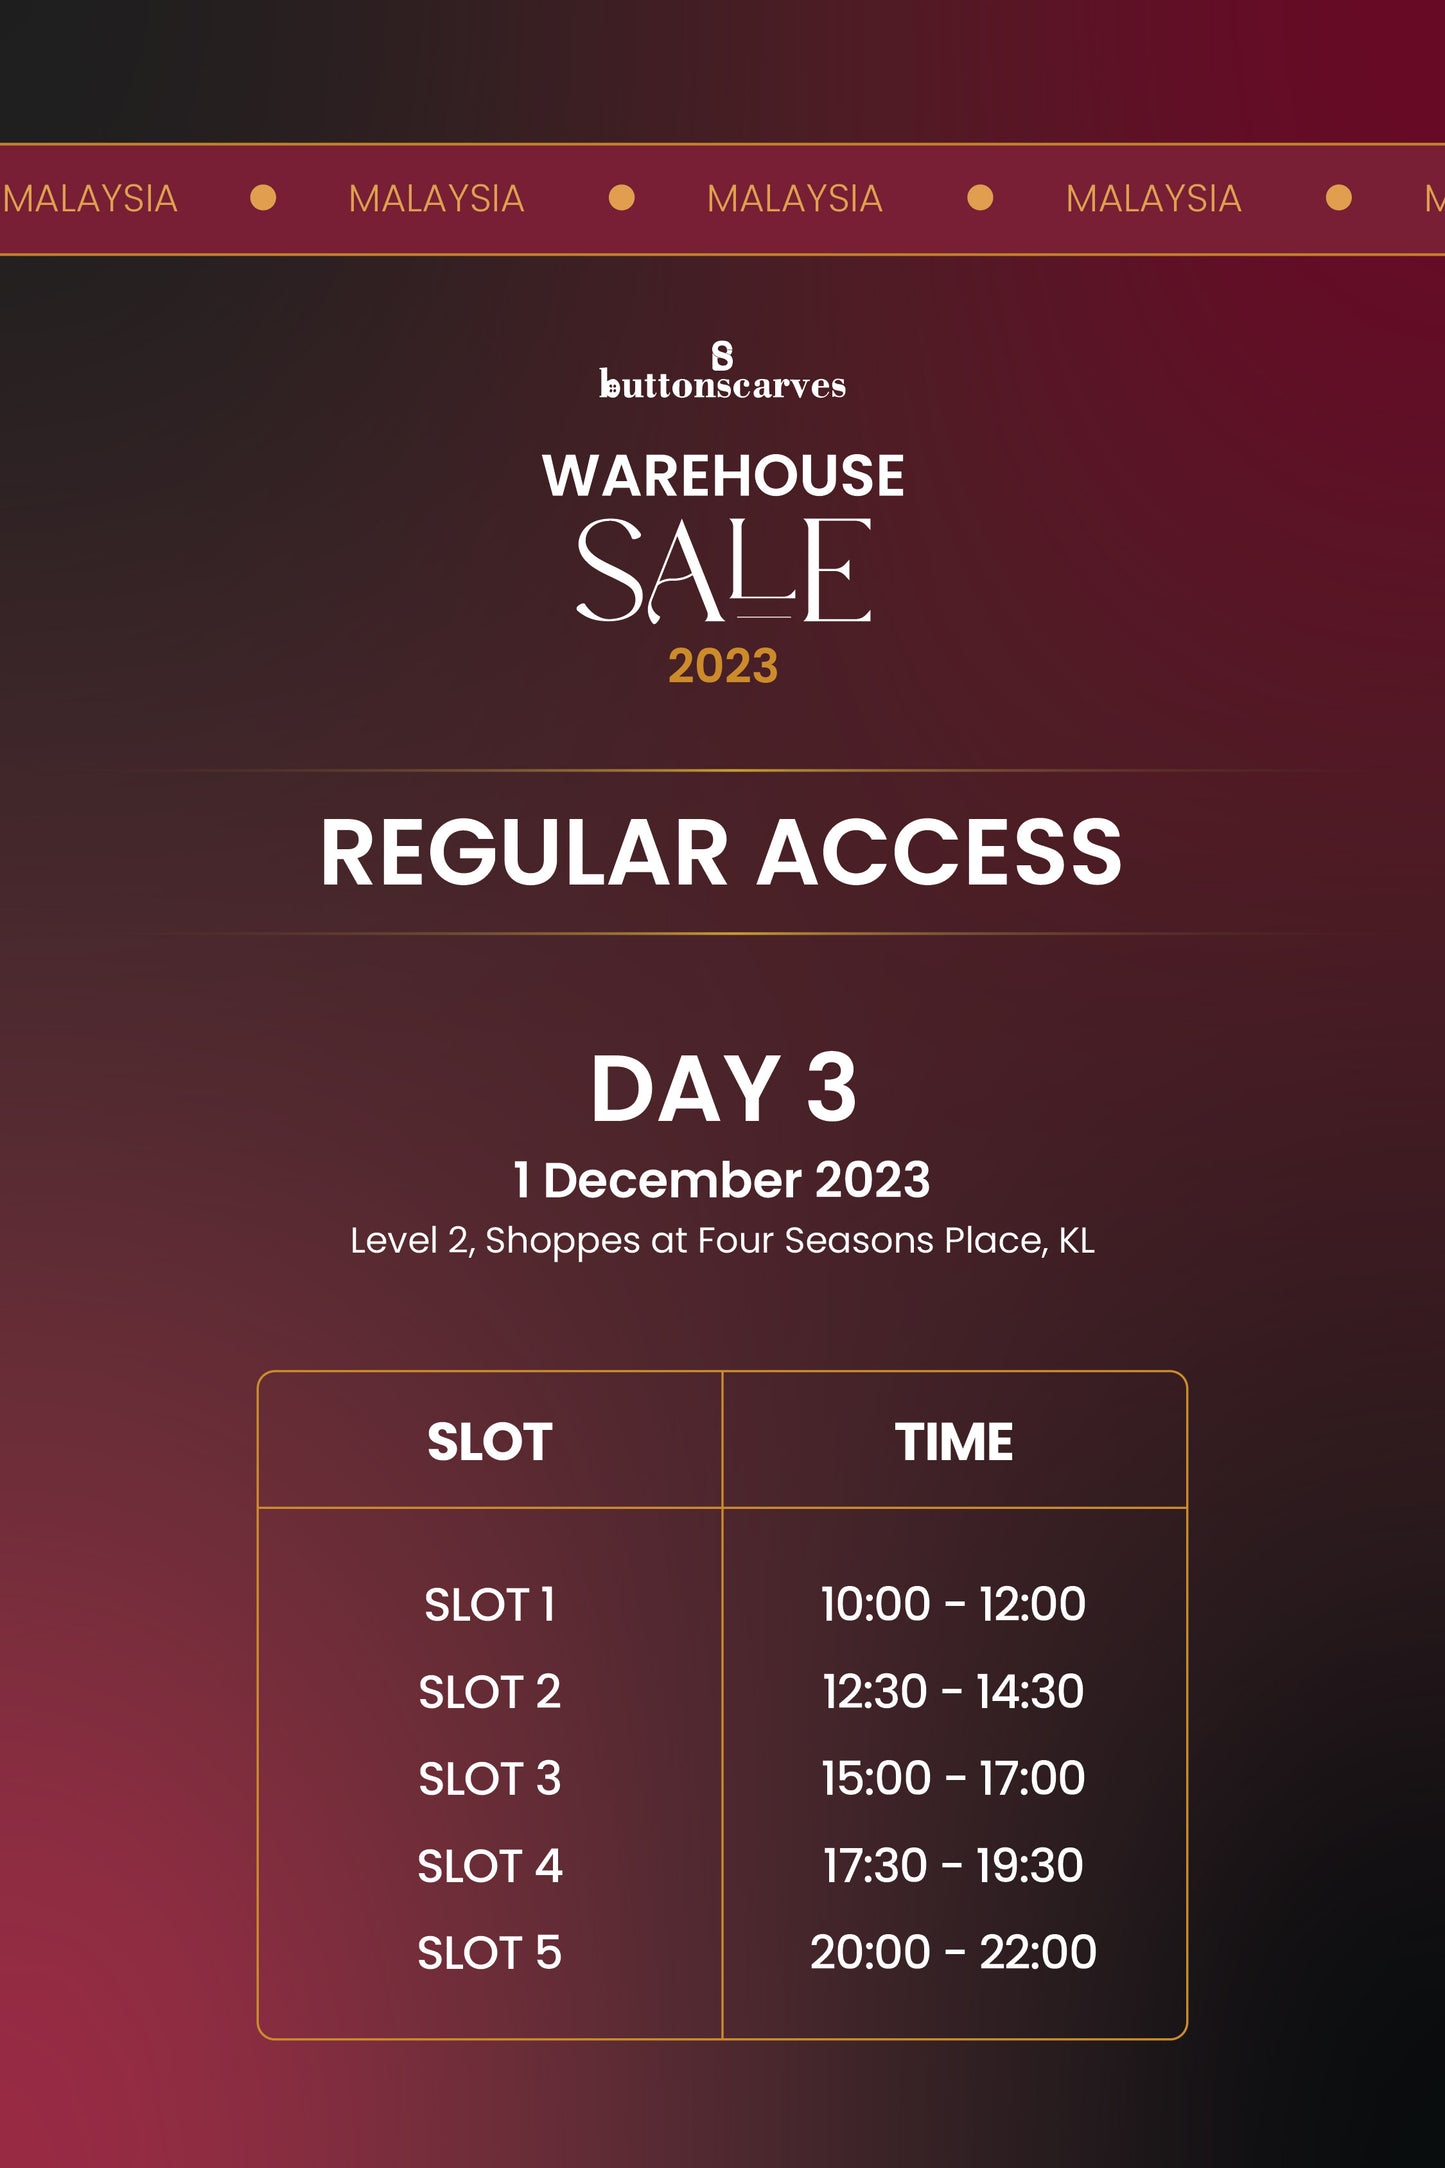 Warehouse Sale 2023 Ticket - Day 3